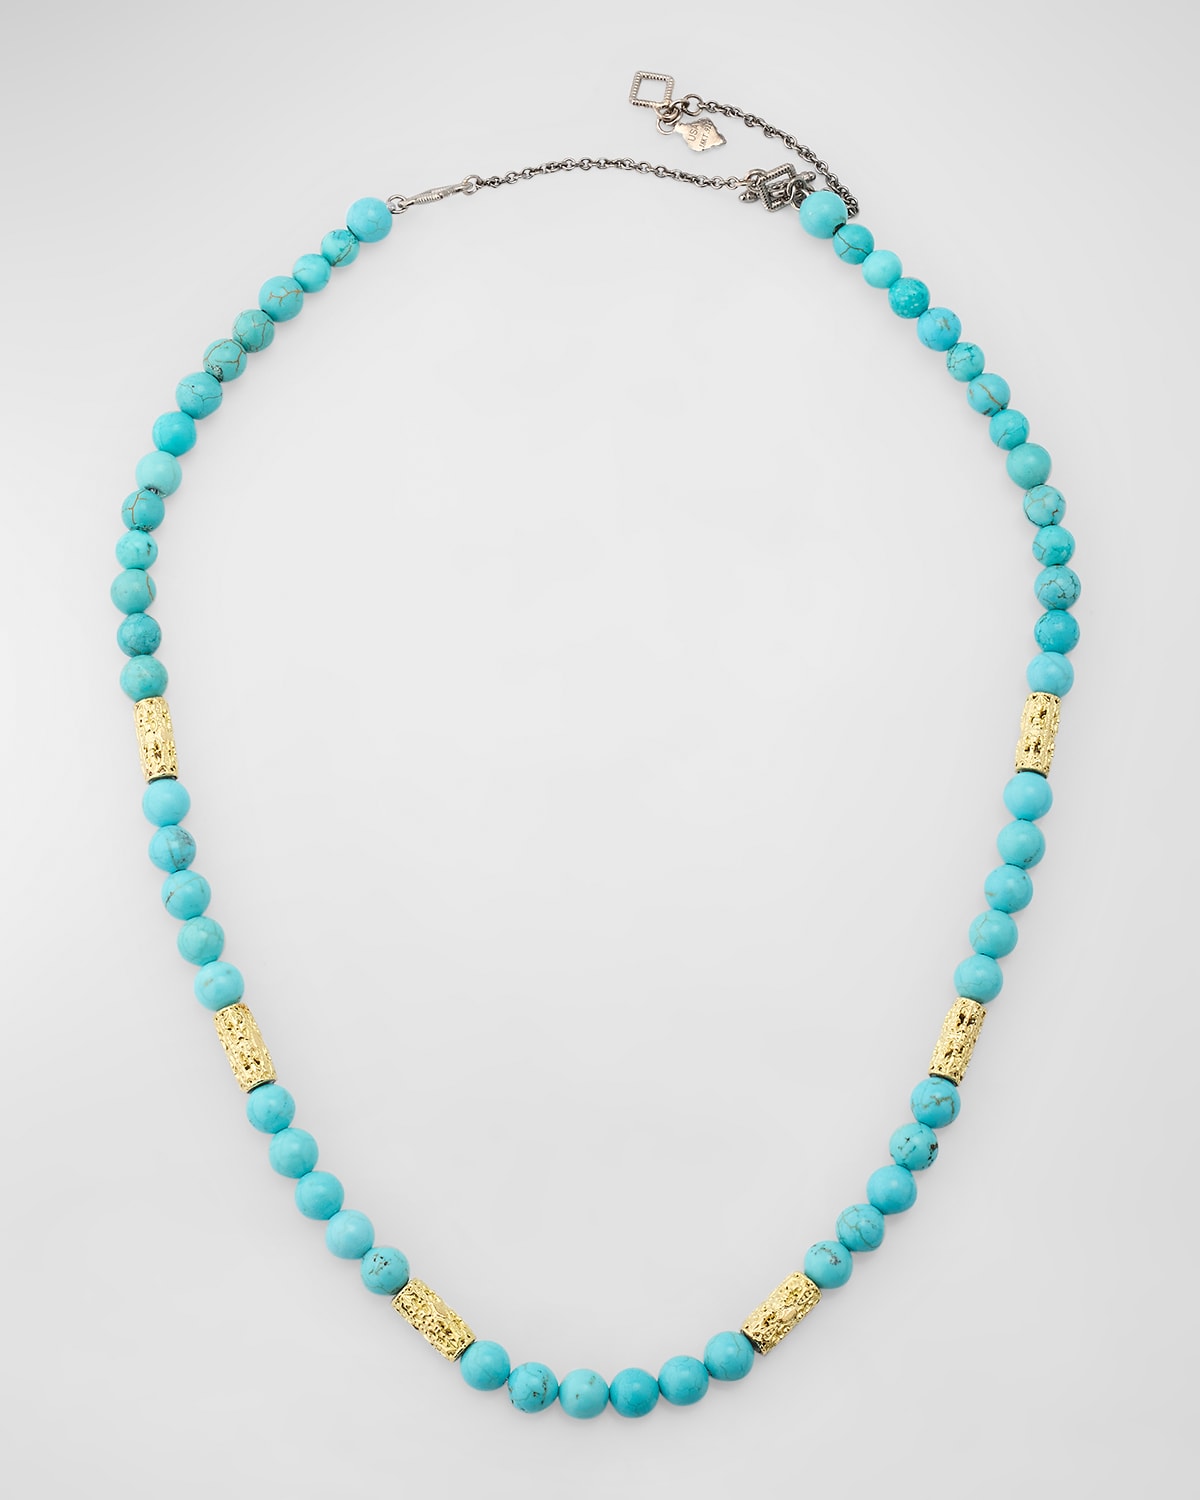 Turquoise Beaded Necklace, 16-20"L